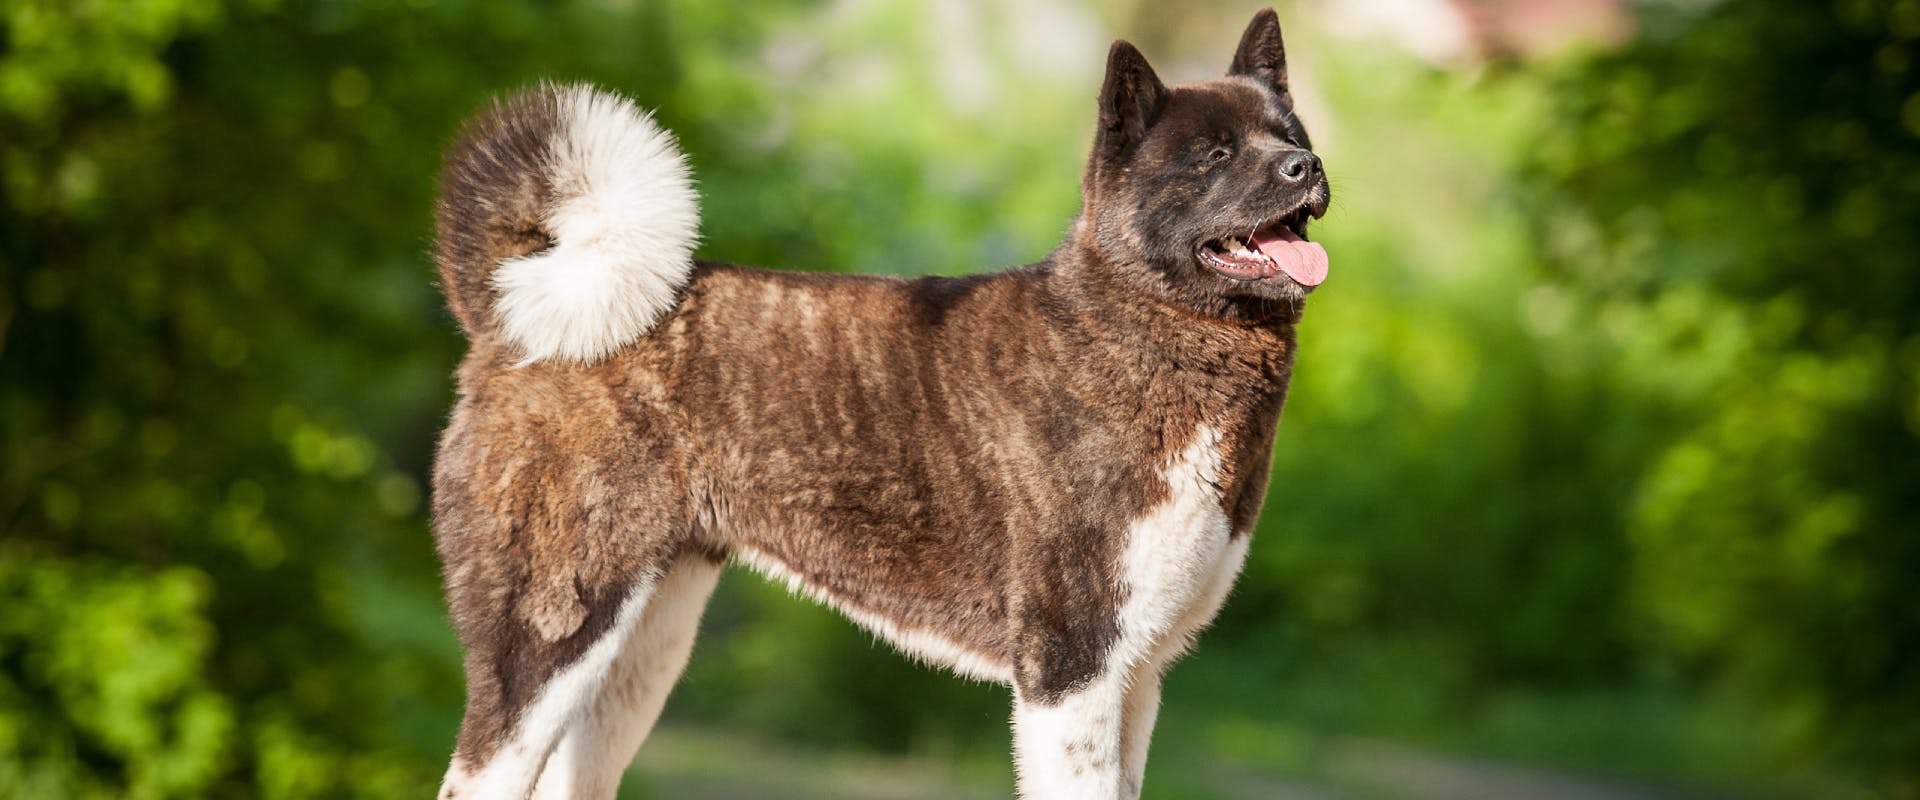 An American Akita stood outside in a park